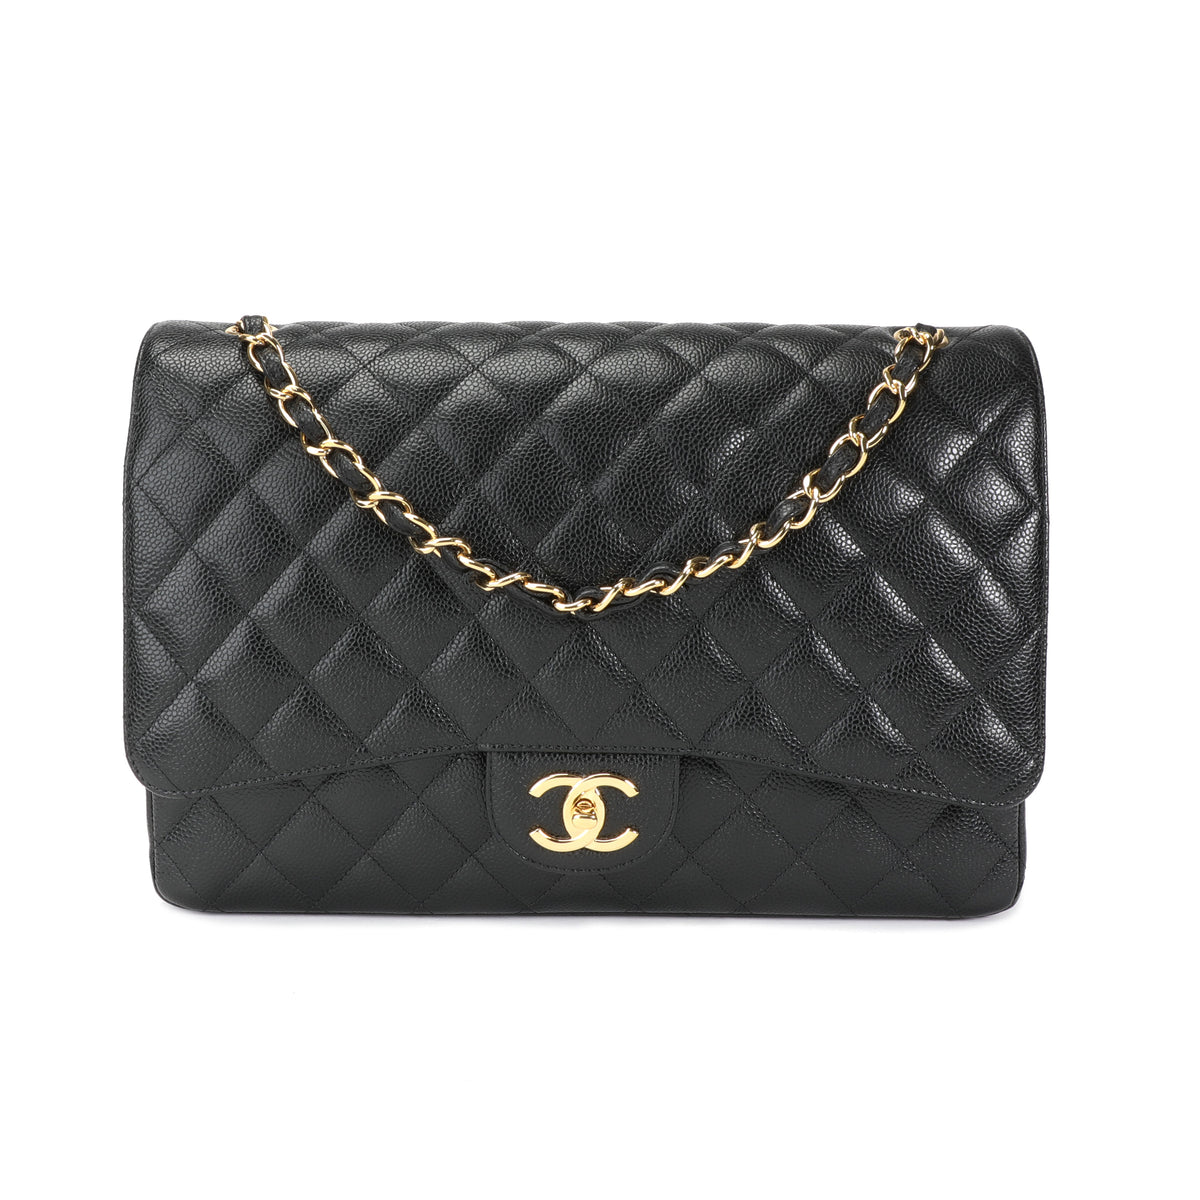 Chanel Black Caviar Quilted Classic Maxi Double Flap Bag by WP